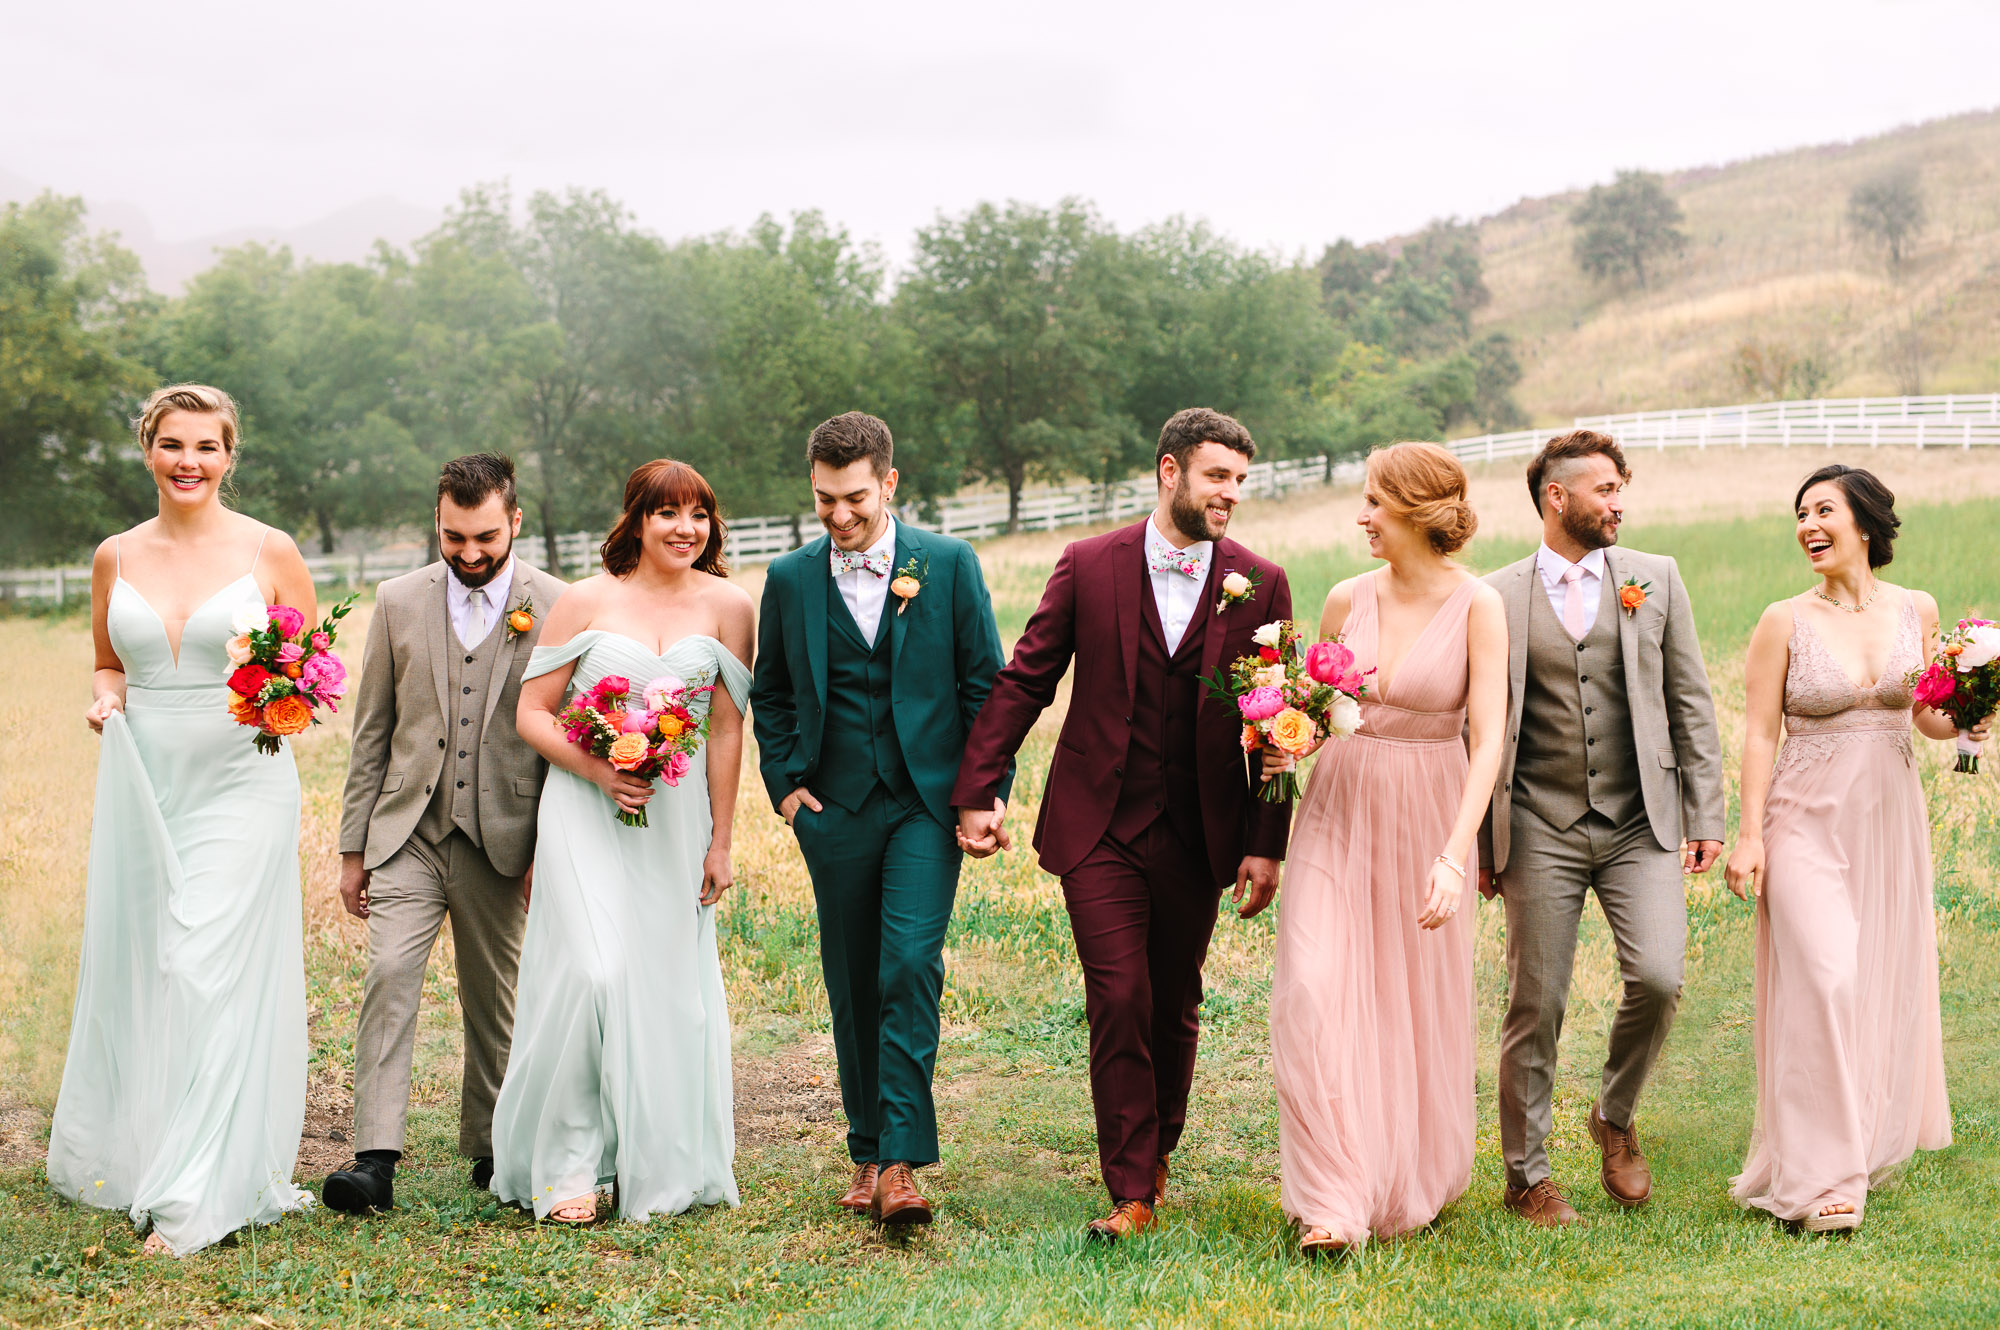 Stylish wedding party walking by Mary Costa Photography